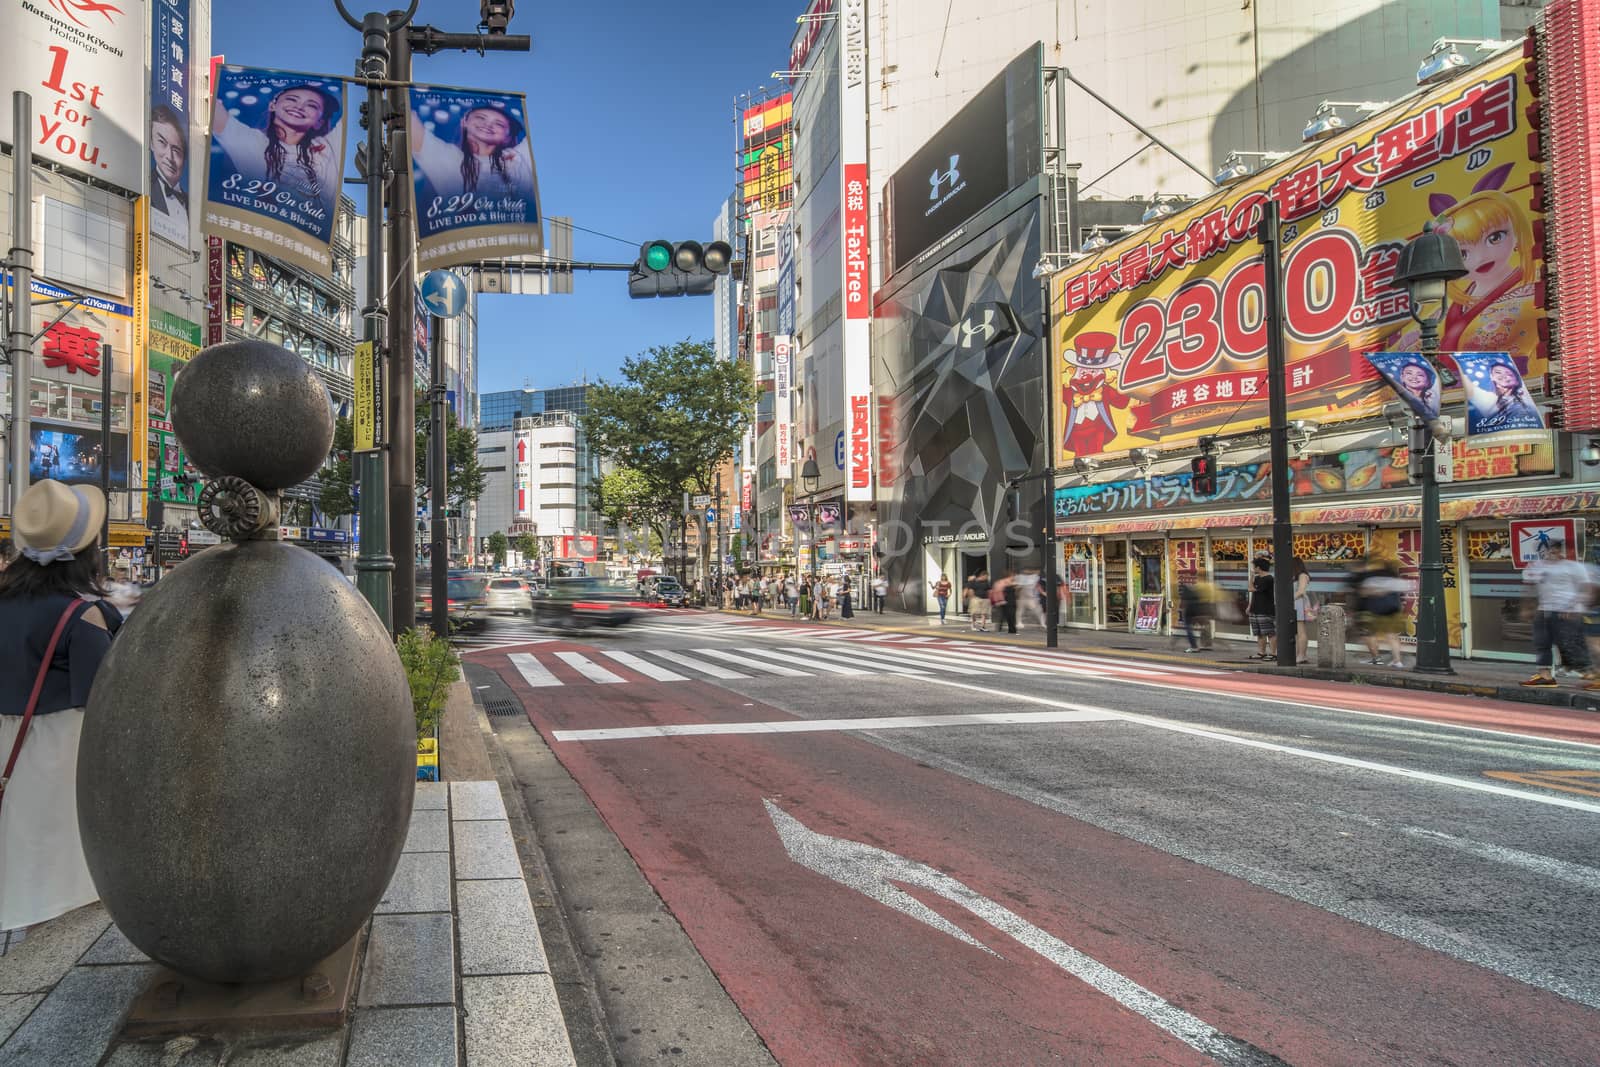 Public art sculpture created by sculptor artist Tatsumi Oki in 1990 entitled The Fossil of Time located in Dogenzaka Street near the crossing intersection of Shibuya Station. The egg shape symbolizes the origin of life and the valve the modern era.